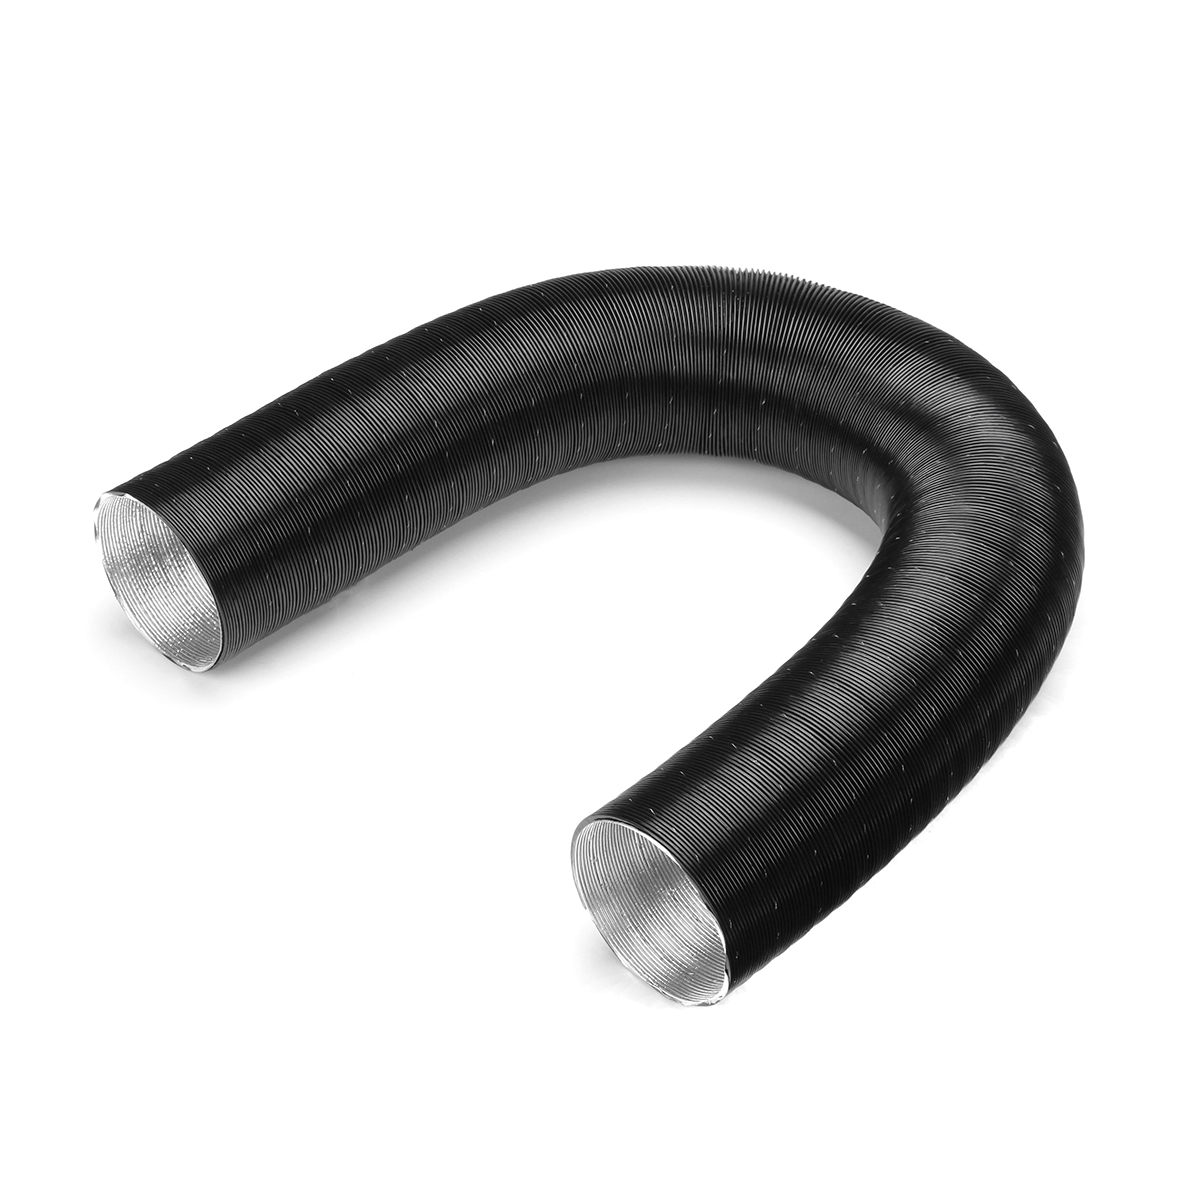 60mm-Heater-Duct-Pipe-Hot--Cold-Air-Conditioner-Ducting-For-Diesel-Heater-Webasto-Dometic-1348515-4